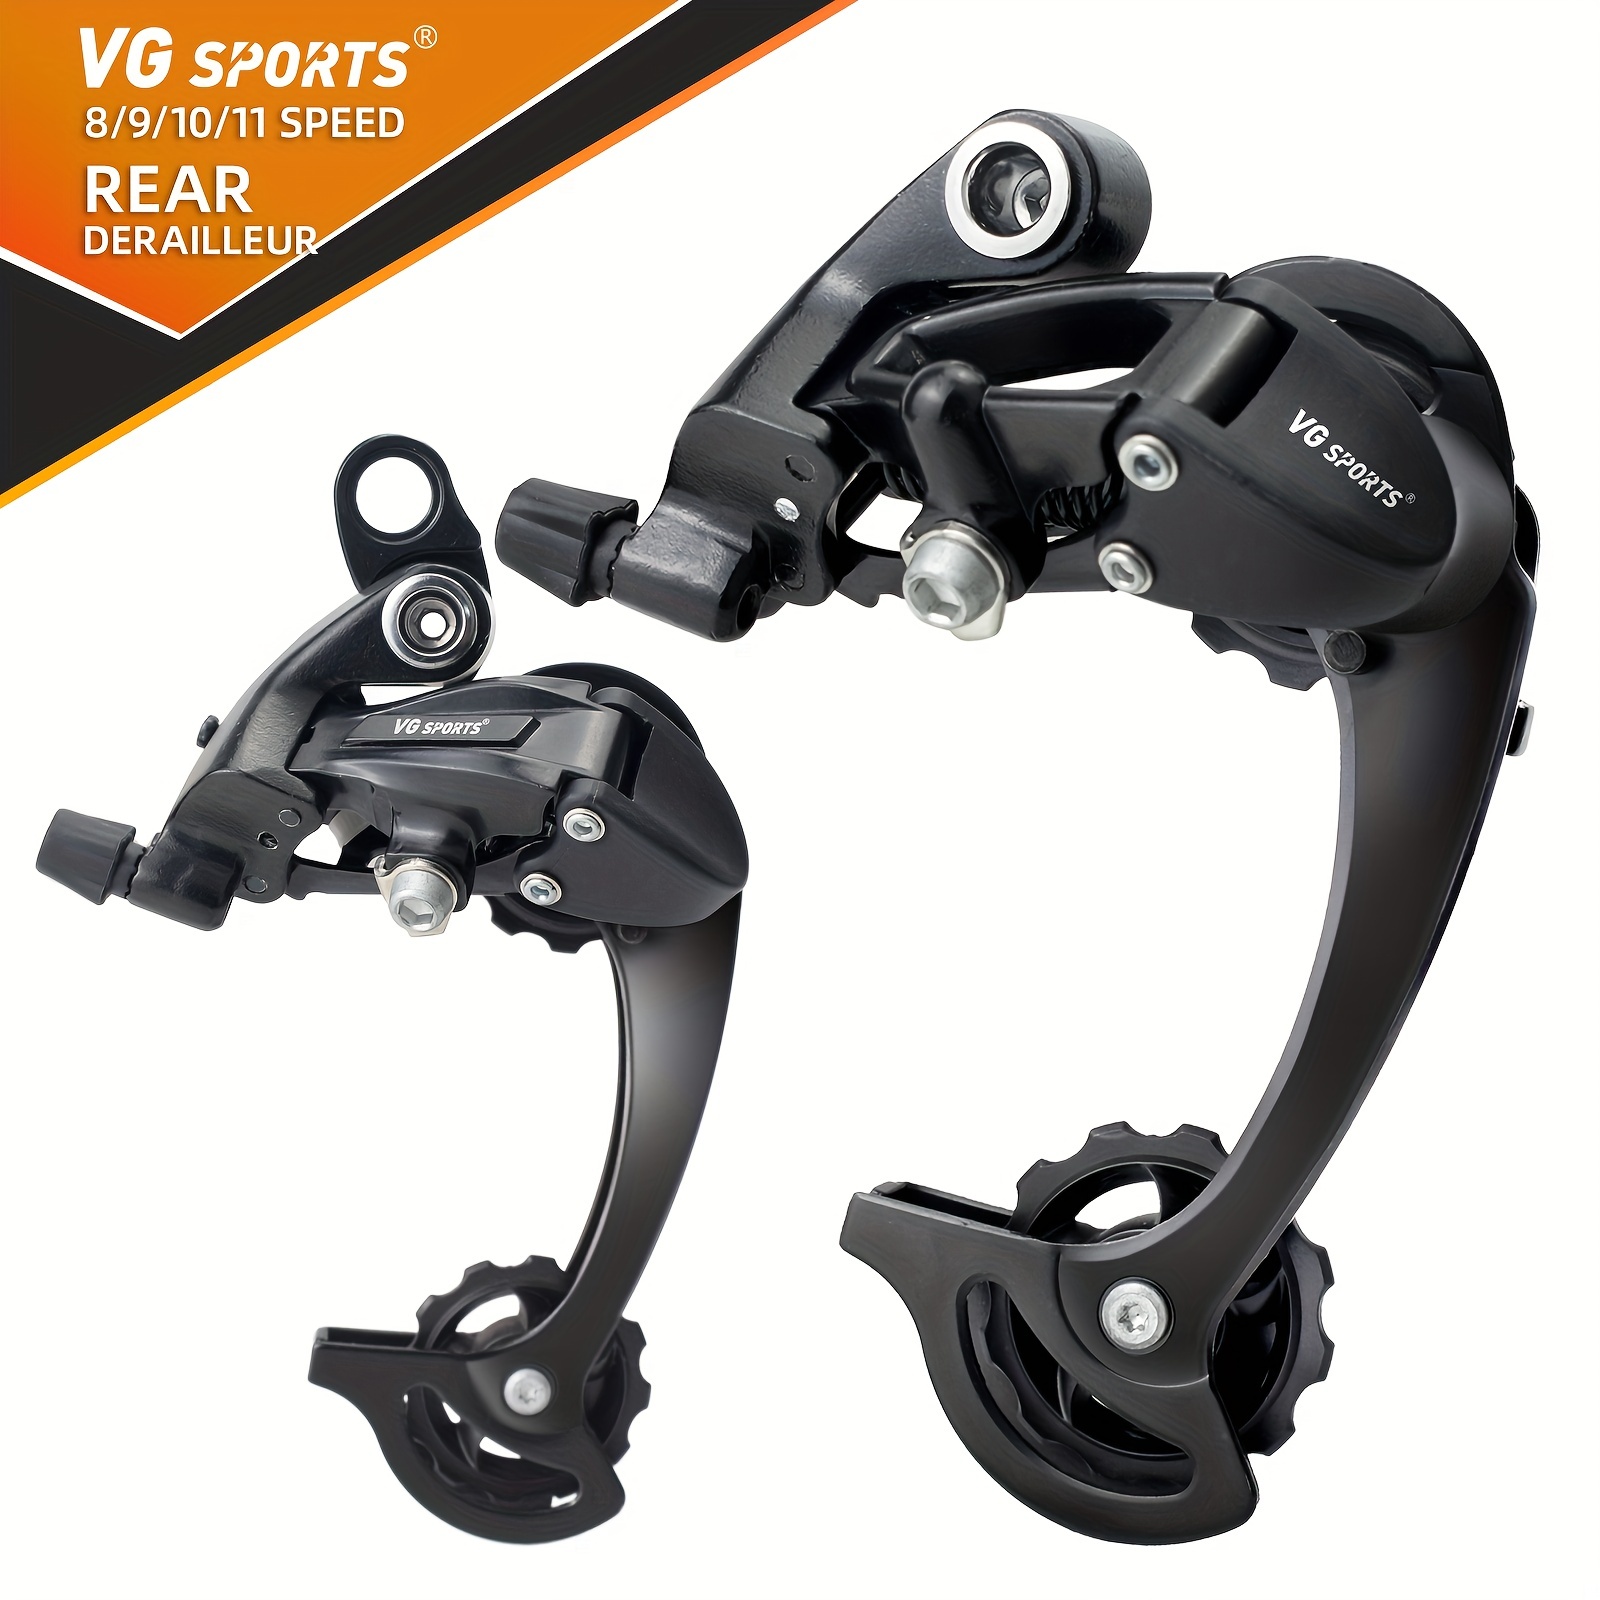 Vg Sports Bicycle Rear Derailleur 8 9 10 11 Speed For Mtb Mountain Bike Rd Spare Parts 8s 9s 10s 11s System Bike Accessories Quick and Secure Online Checkout Temu Czech Republic